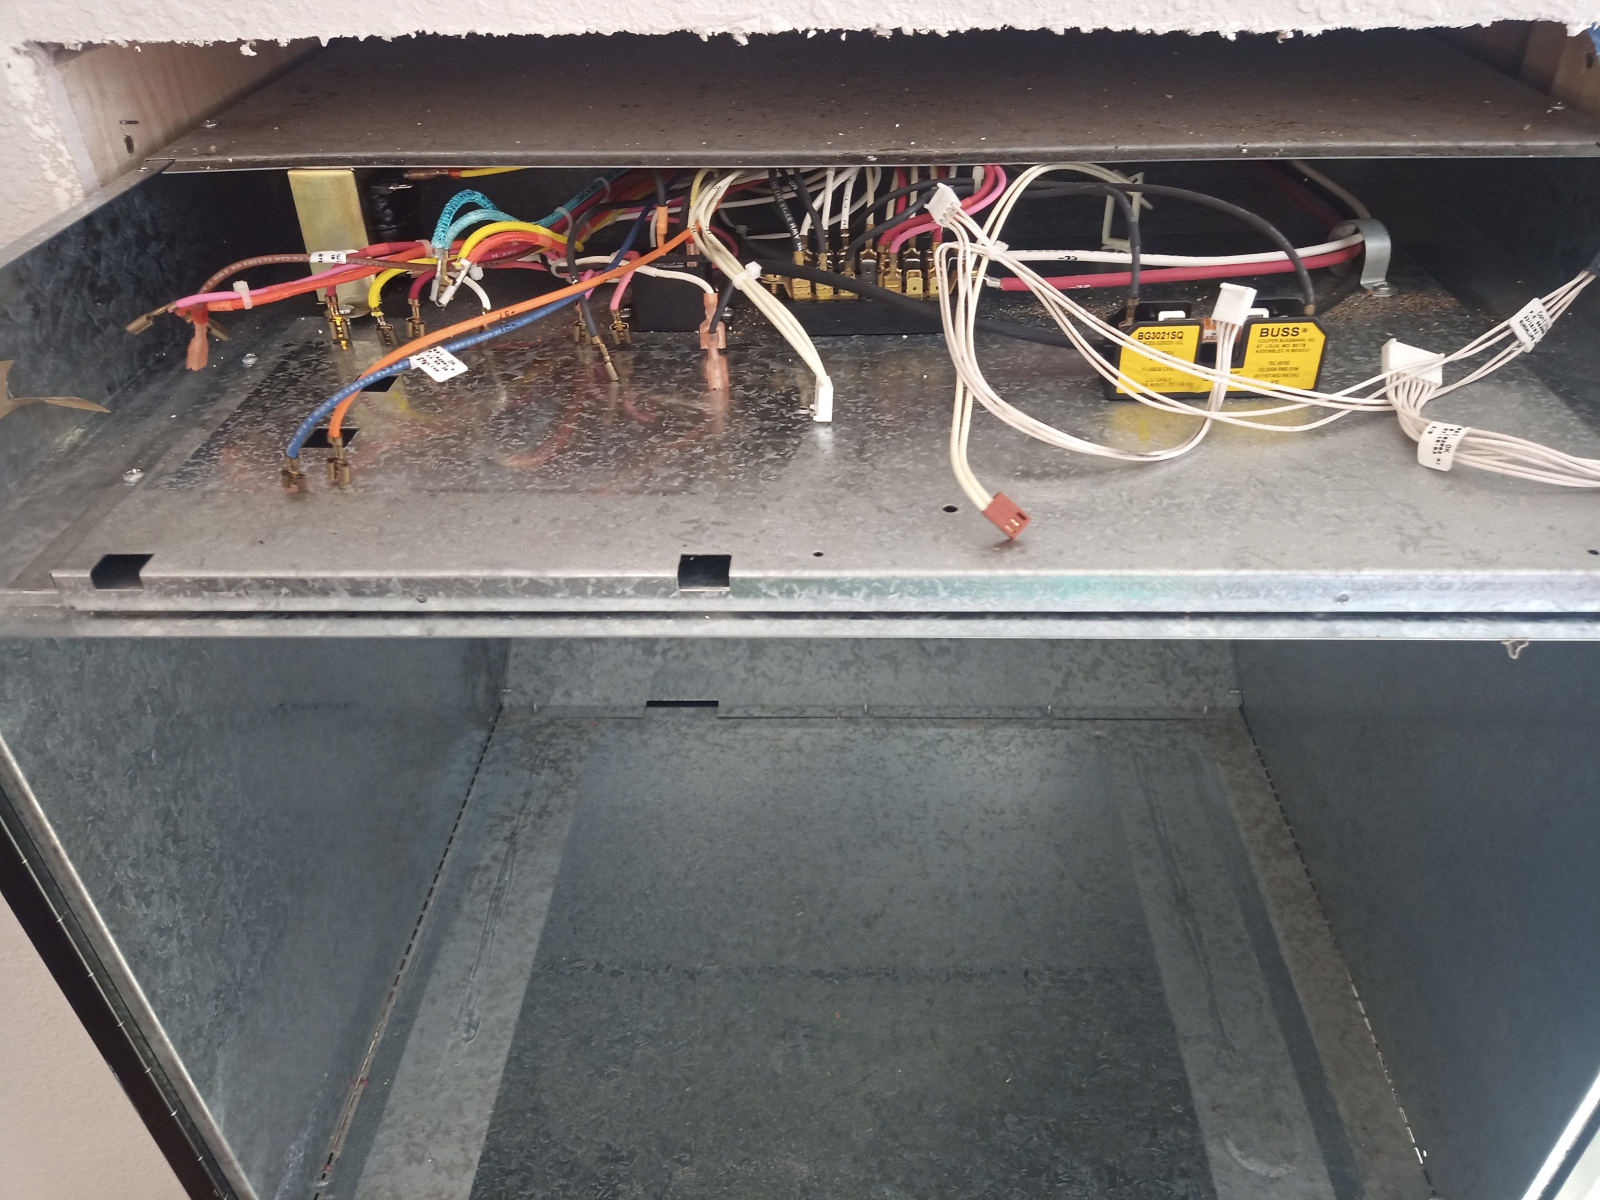 Loose wires haphazardly arranged on top of the oven frame.